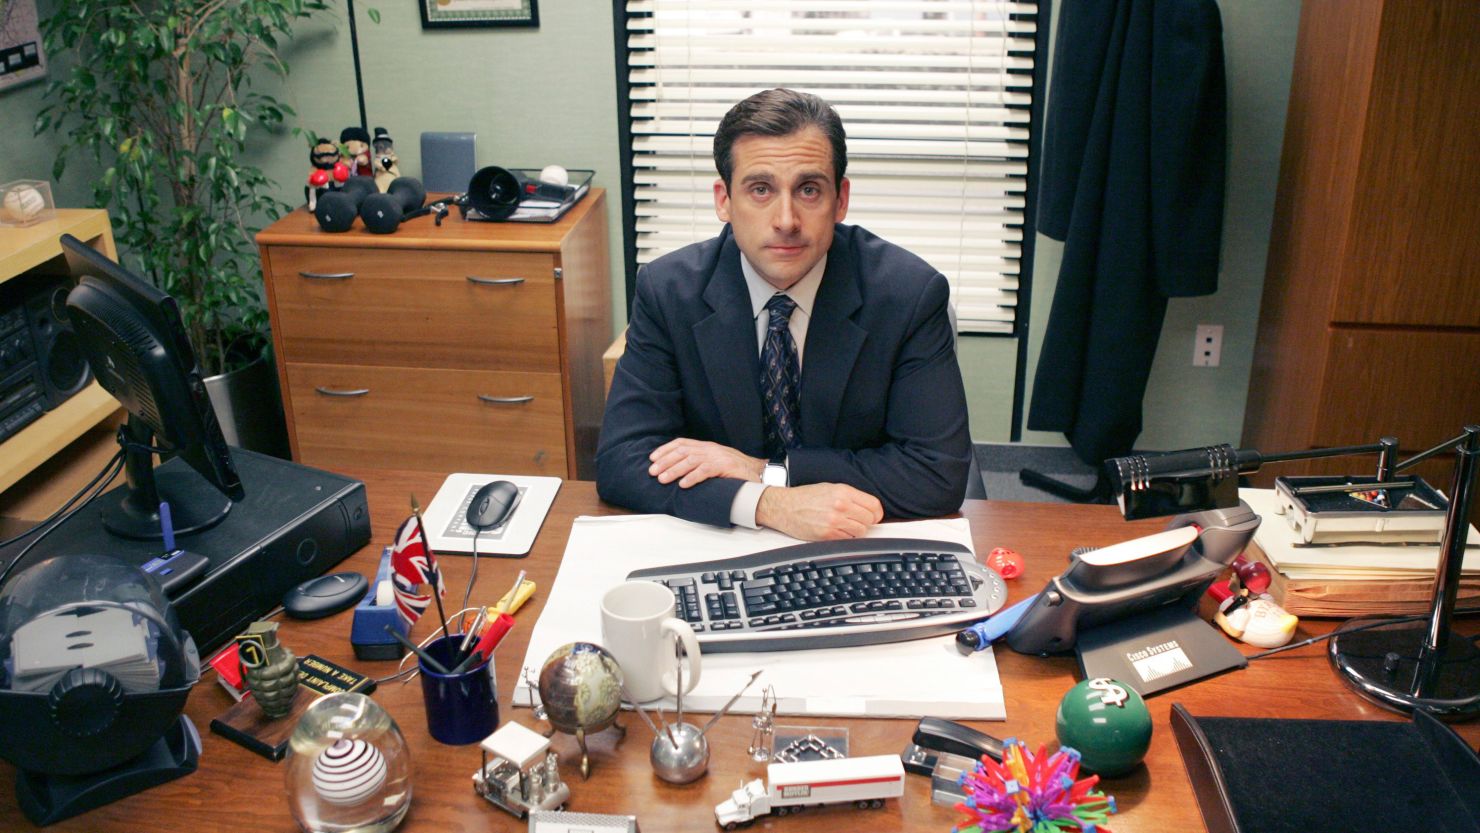 The new Office video game shows why Steve Carell's show will never die -  Polygon